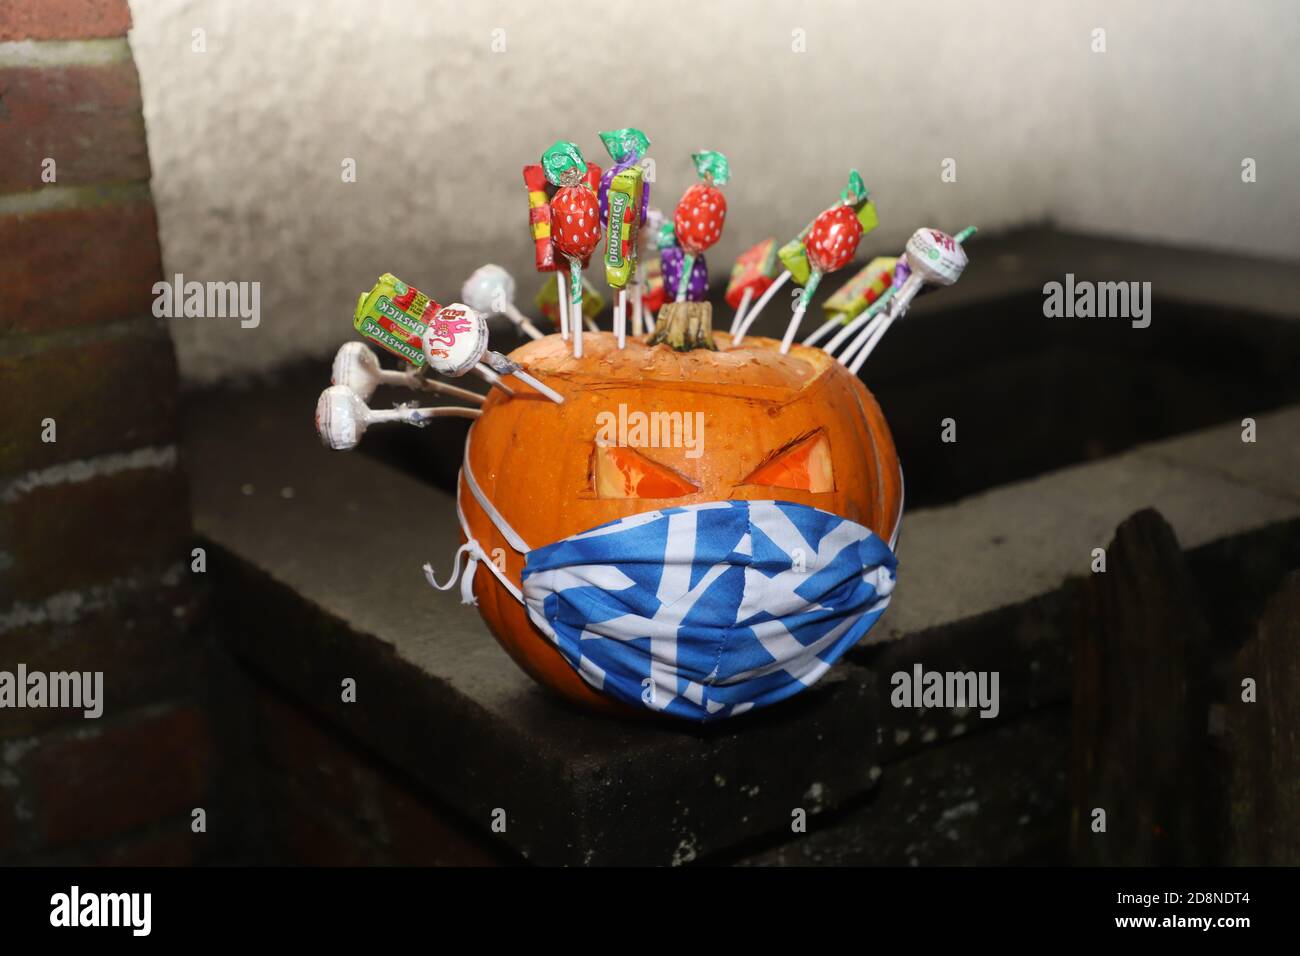 Dundee, UK. 31st October, 2020. Trick or treating in a post covid-19 world. Jack o Lanterns are decorated with lollipops to reduce face to face contact. Credit: Stephen Finn/Alamy Live News Stock Photo